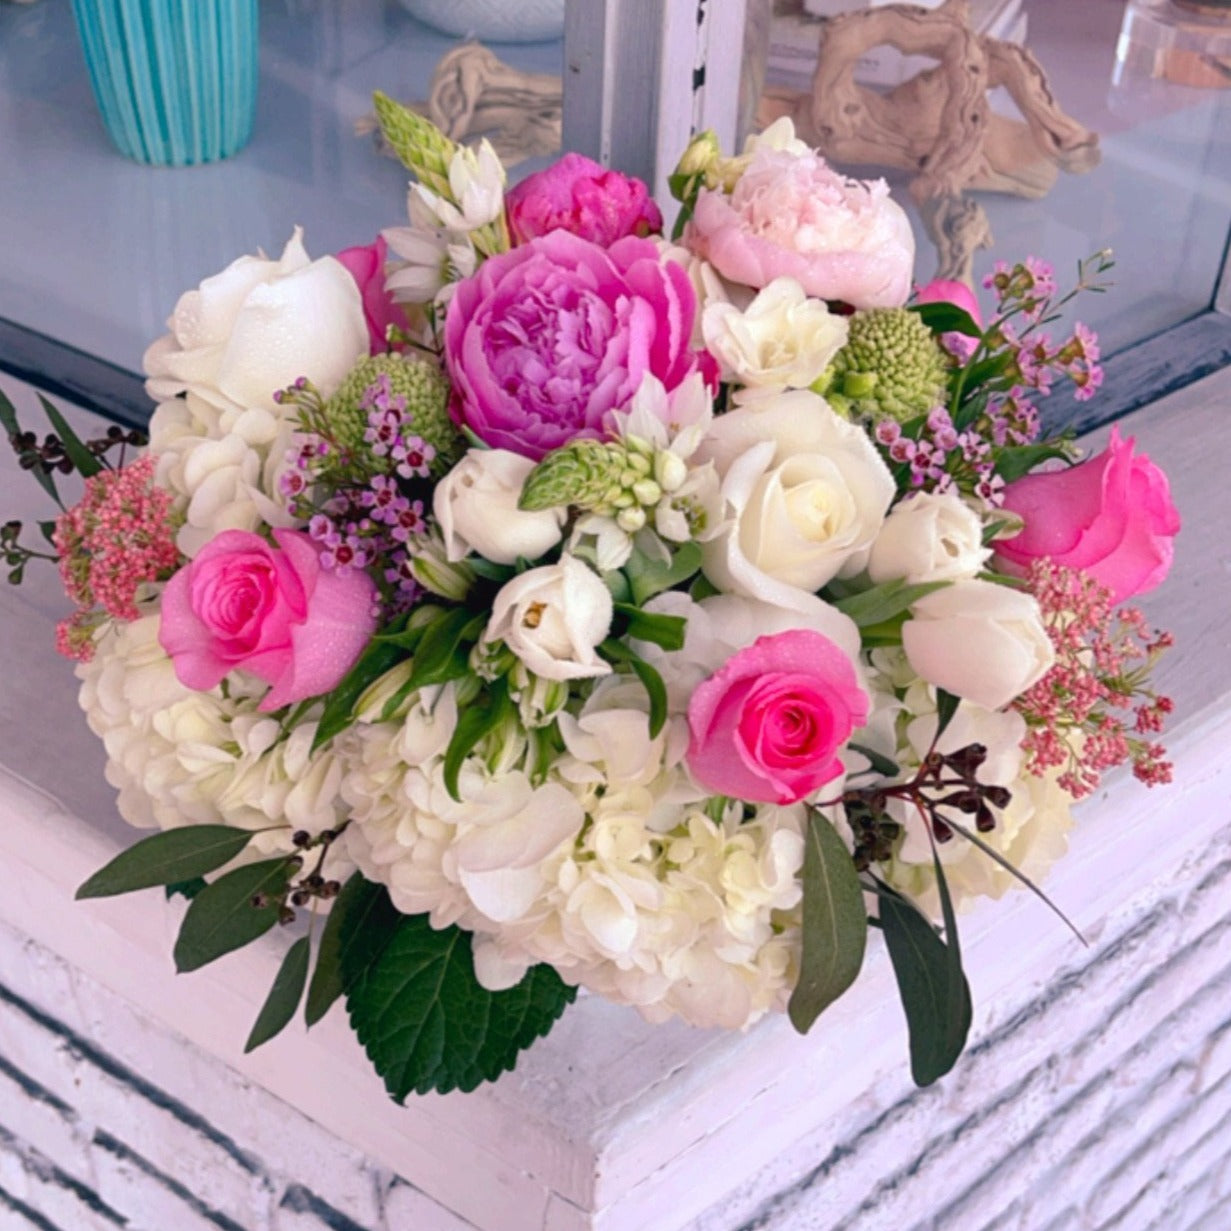 Florist choice bouquet in a vase with roses